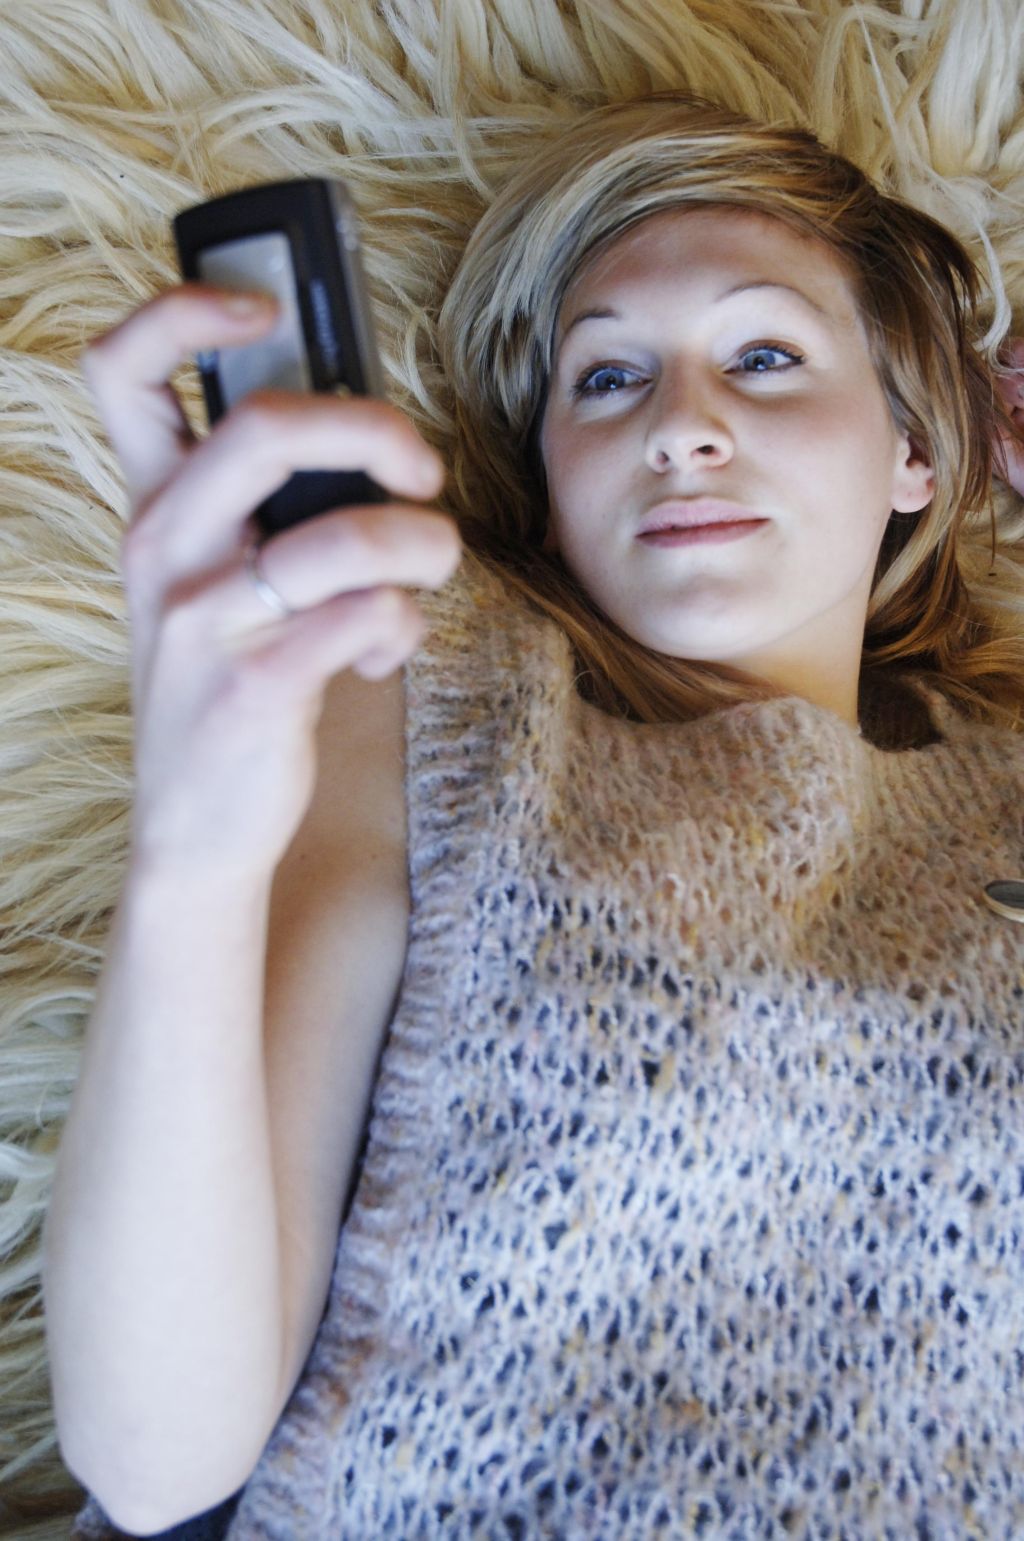 A young woman, lying on the floor, texting on a mobile phone.